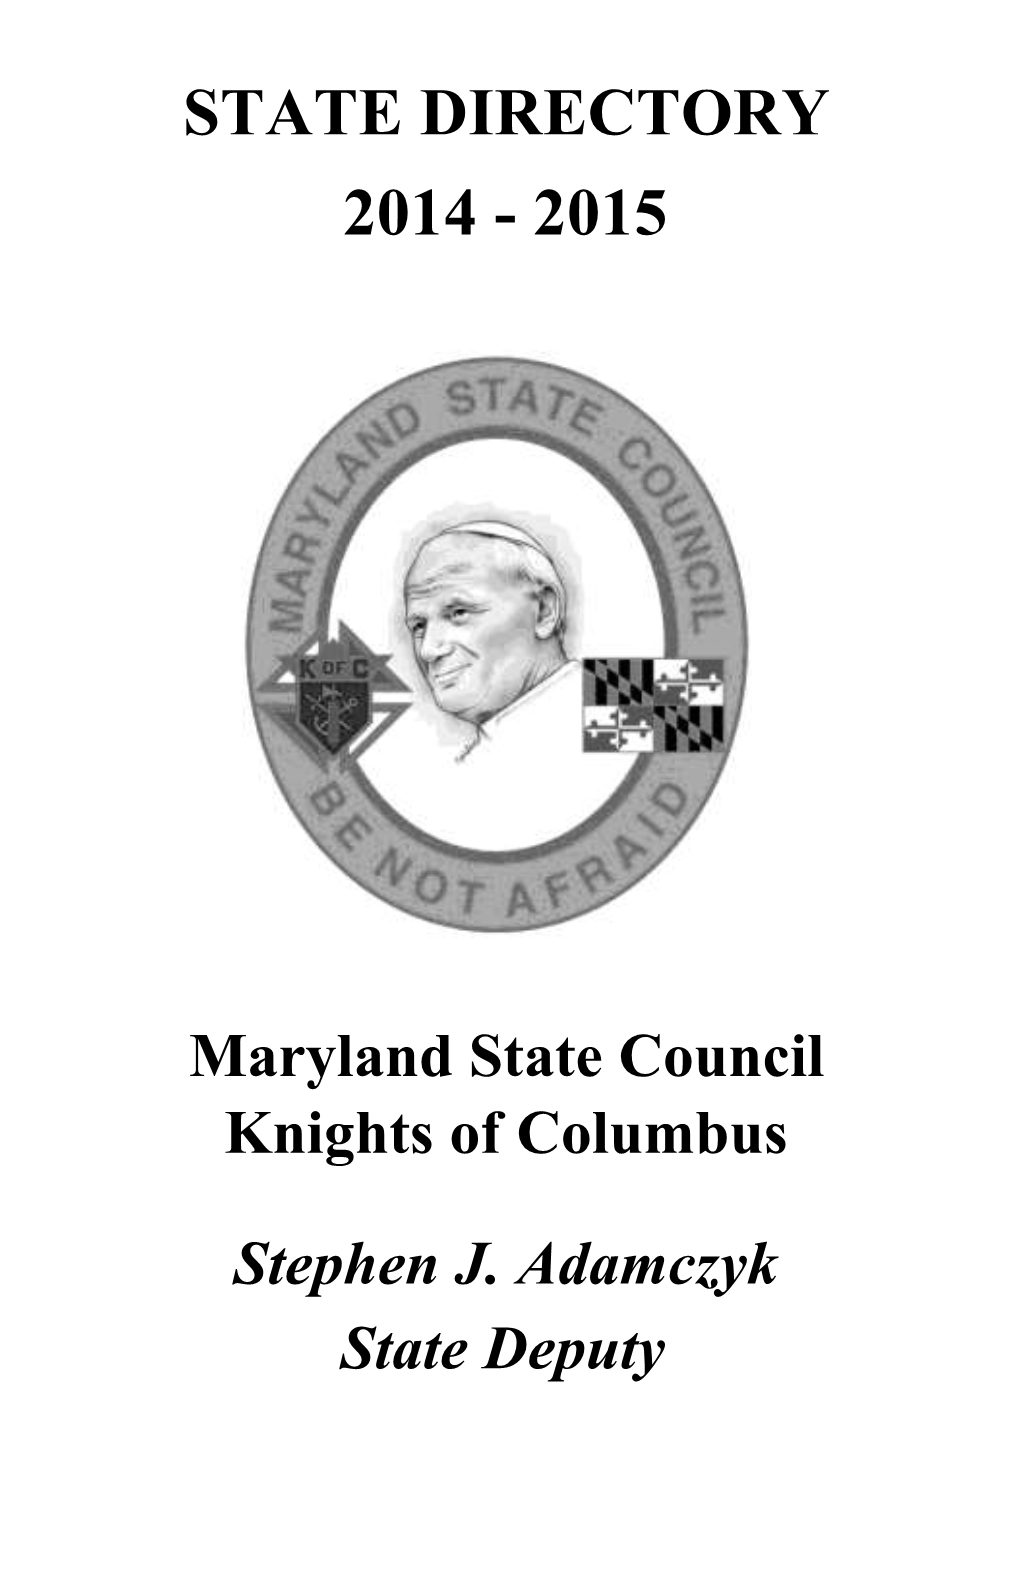 Maryland State Directory for 2014-2015